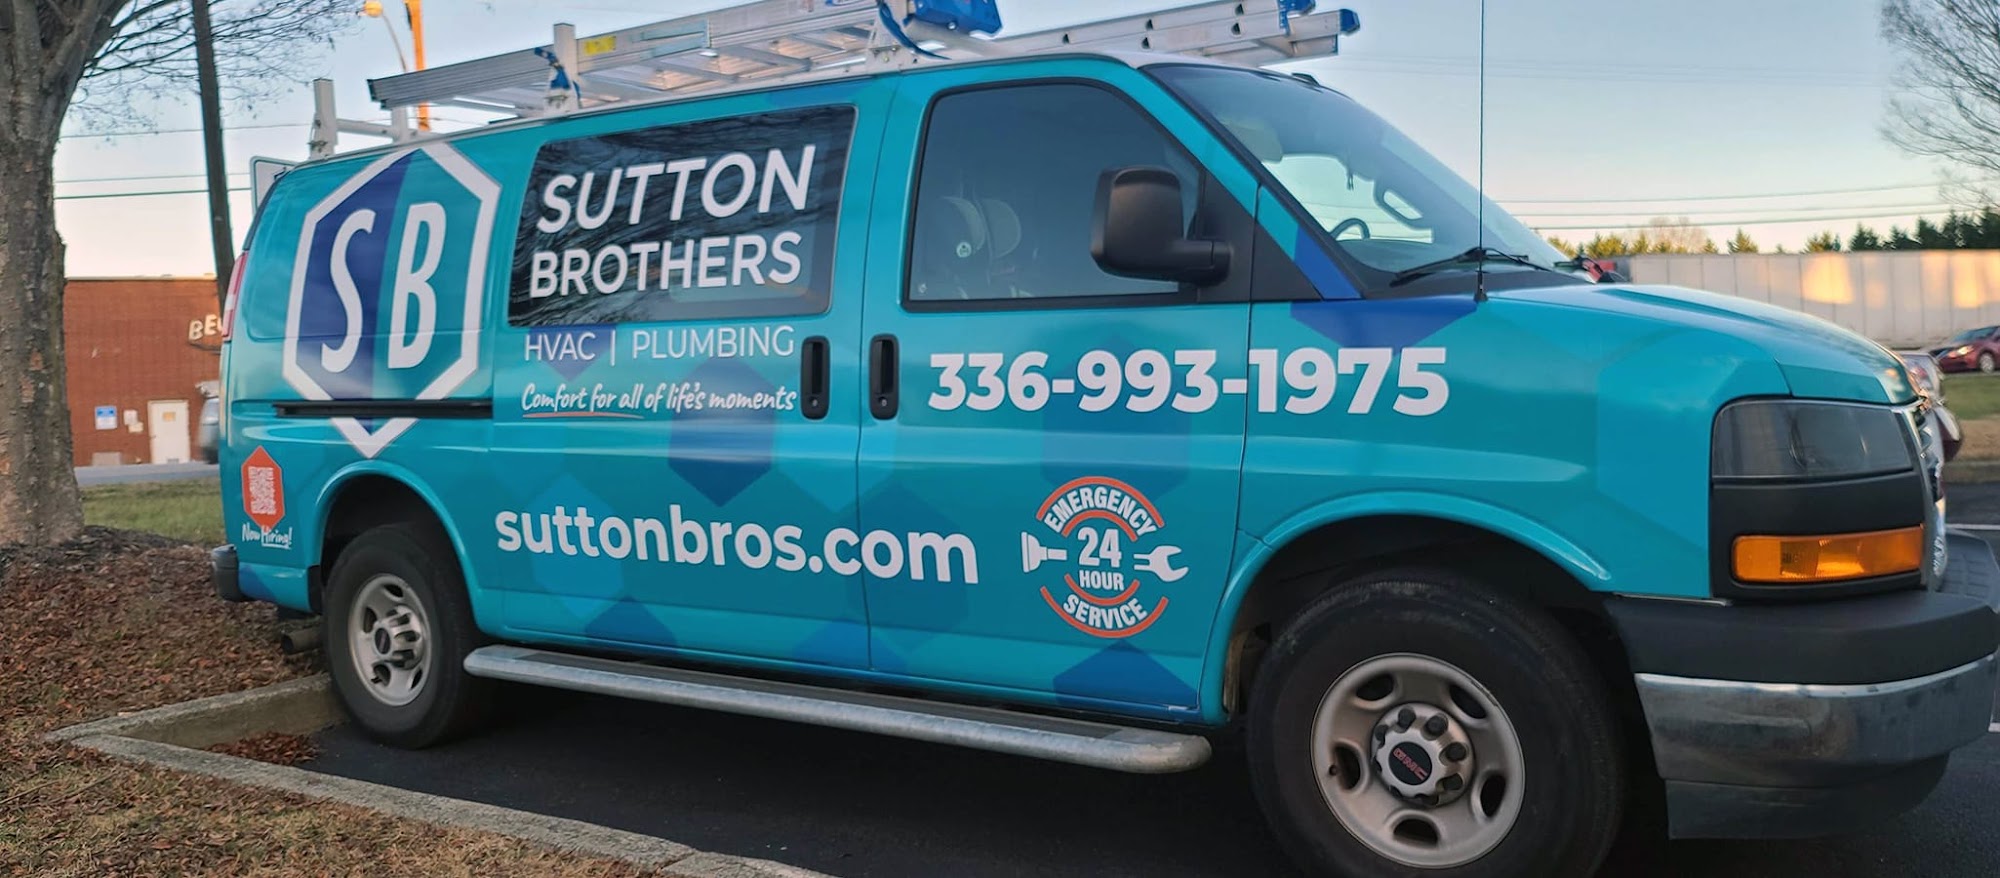 Sutton Brothers Heating, Cooling and Plumbing